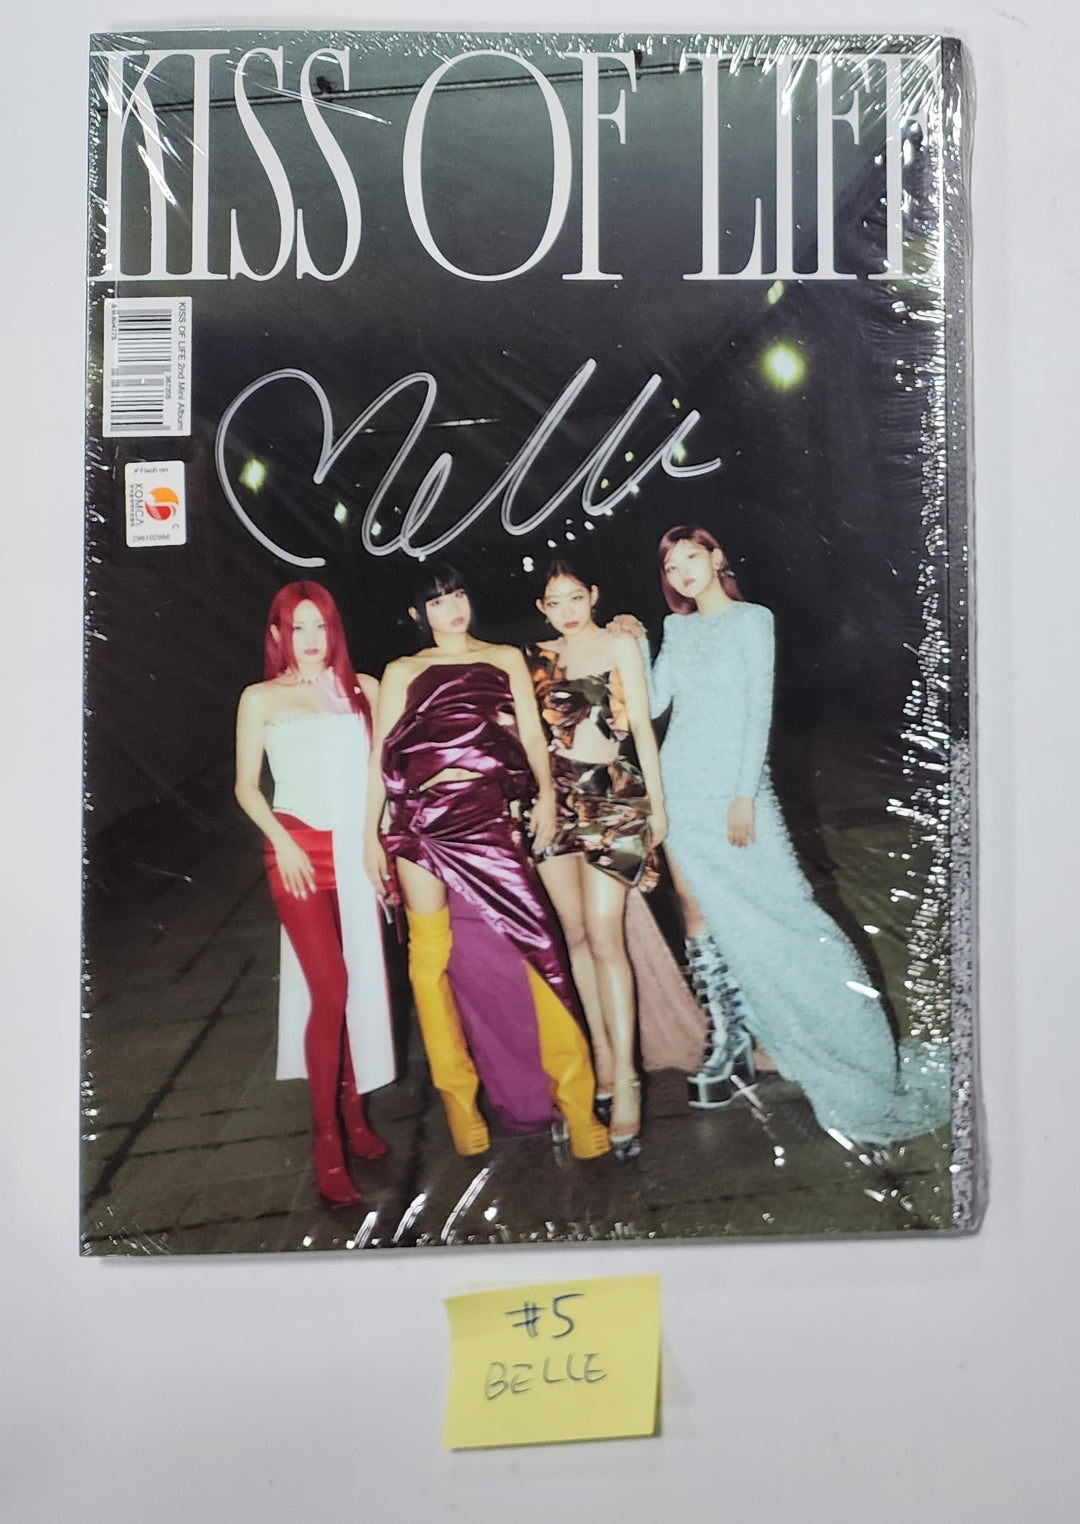 Kiss of Life "Born to be XX" - Hello82 Signed Album [23.11.21]